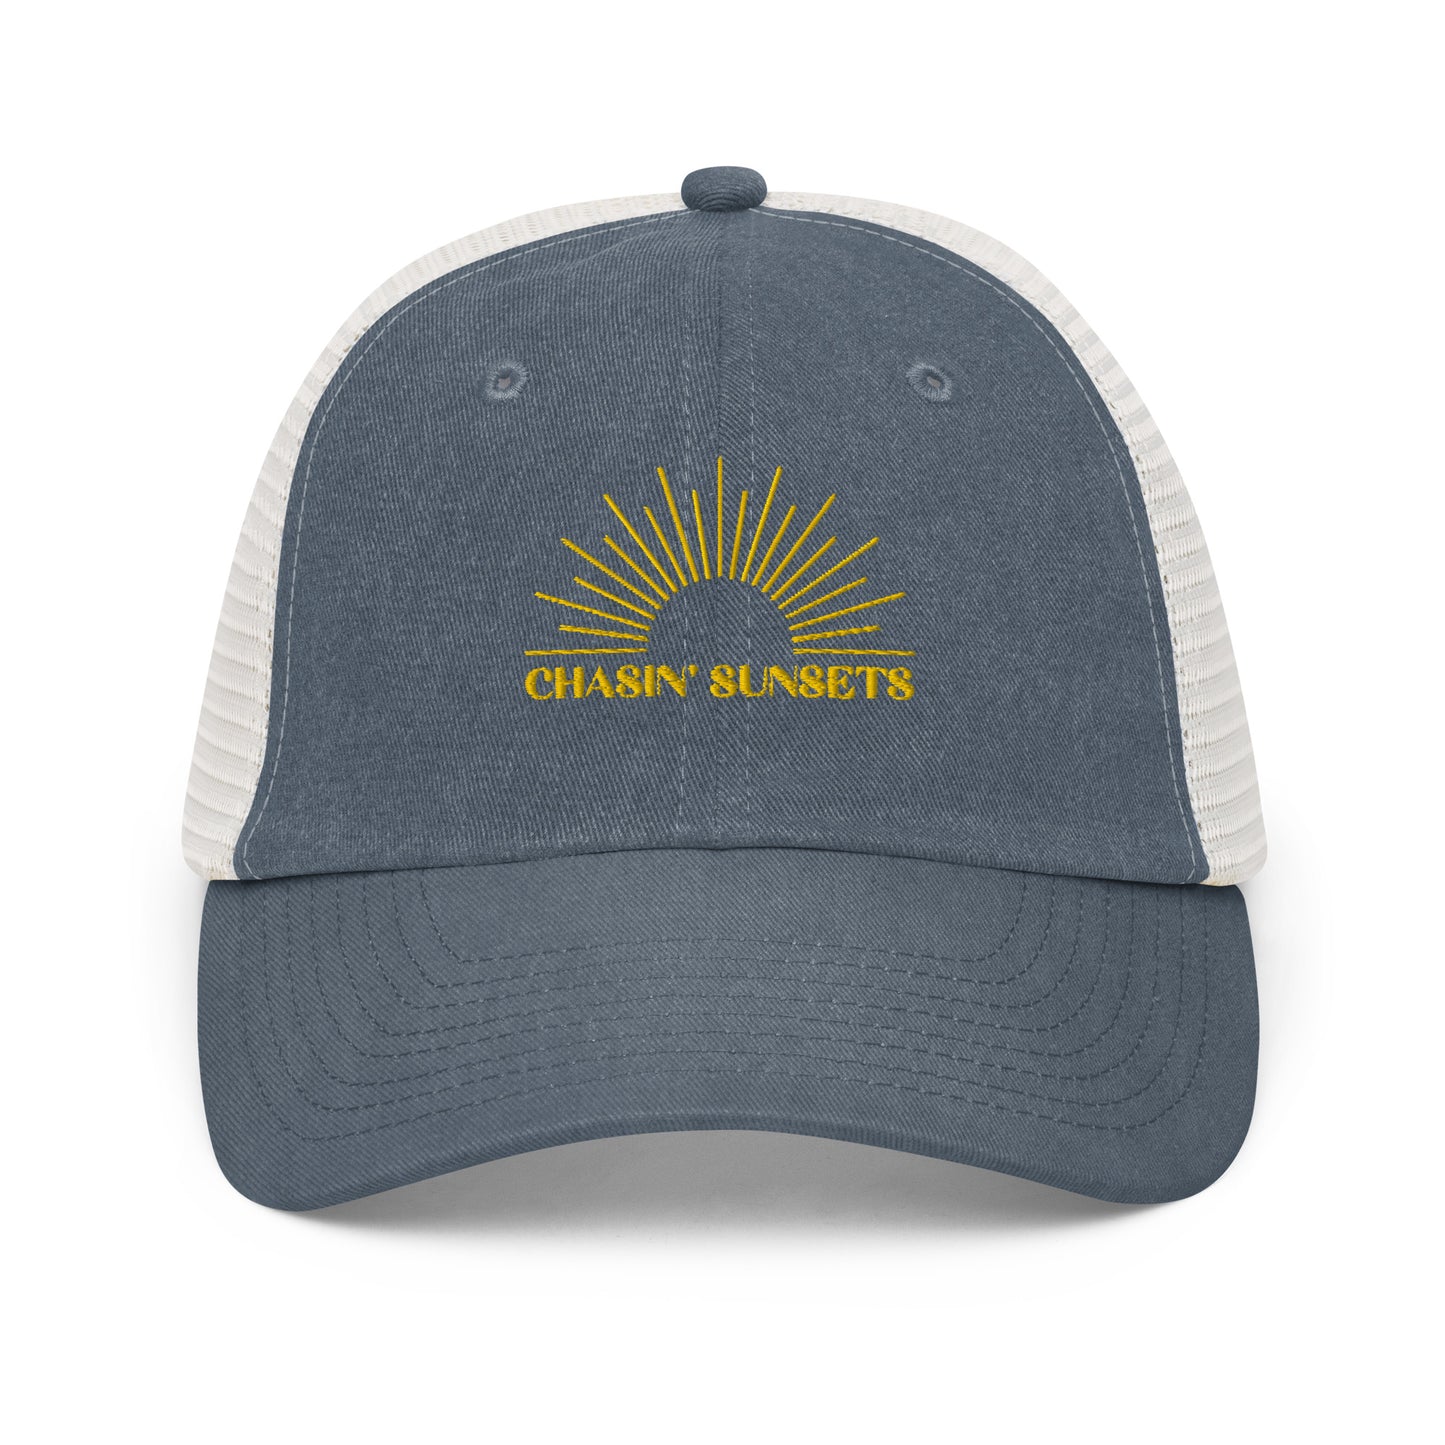 Chasing Sunsets Mesh Hat - Blue